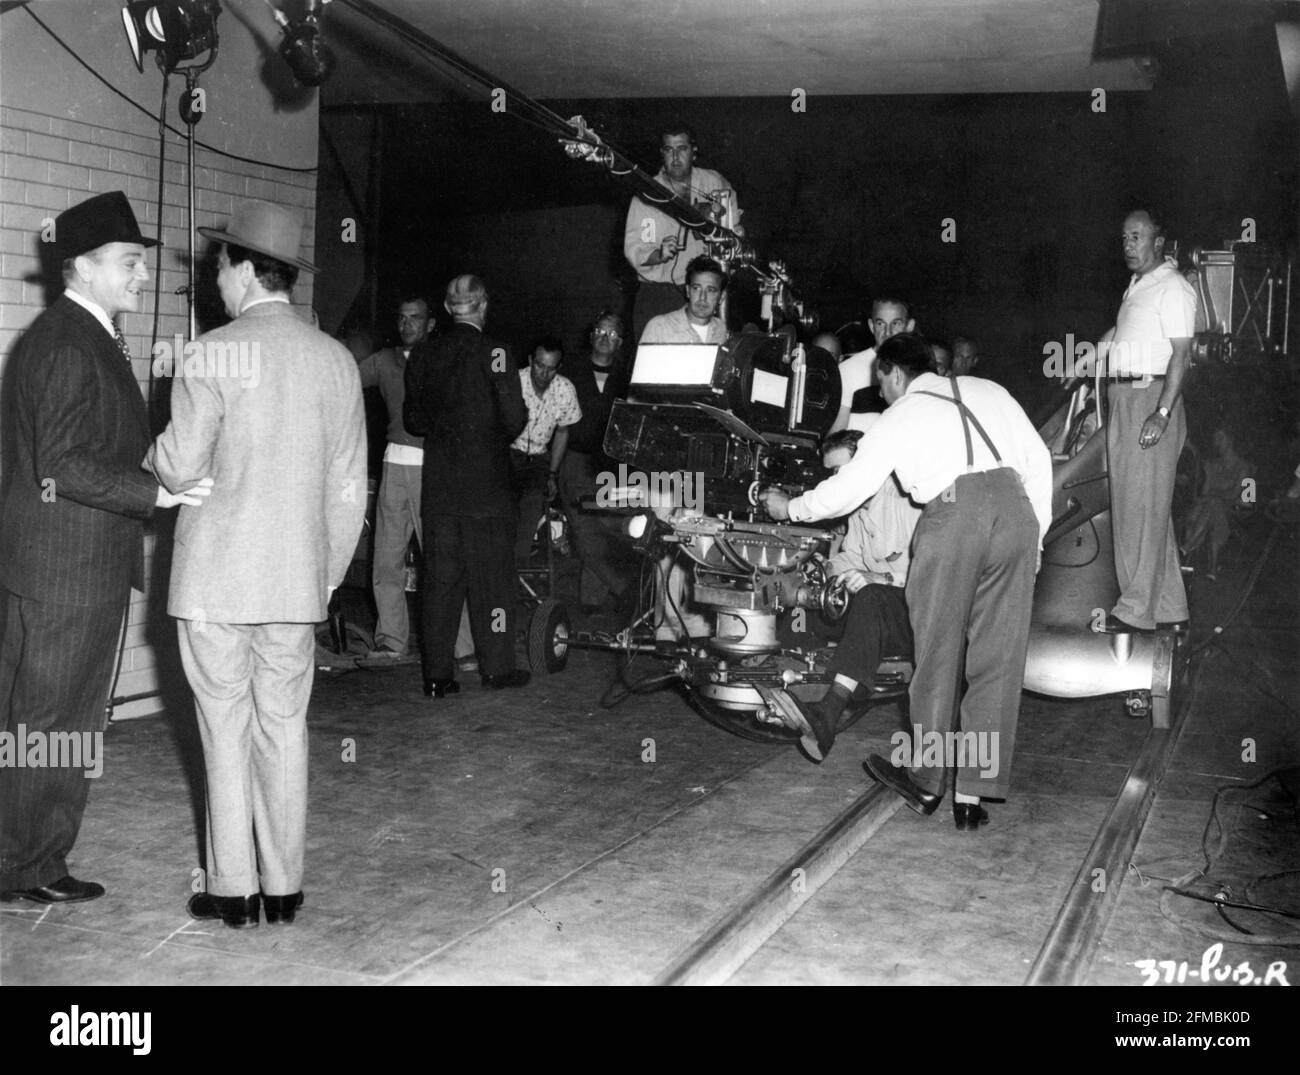 JAMES CAGNEY on set candid with Movie Crew including Cinematographer J. PEVERELL MARLEY (far right) during filming of KISS TOMORROW GOODBYE 1950 director GORDON DOUGLAS screenplay Harry Brown from the novel by Horace McCoy William Cagney Productions / Warner Bros. Stock Photo